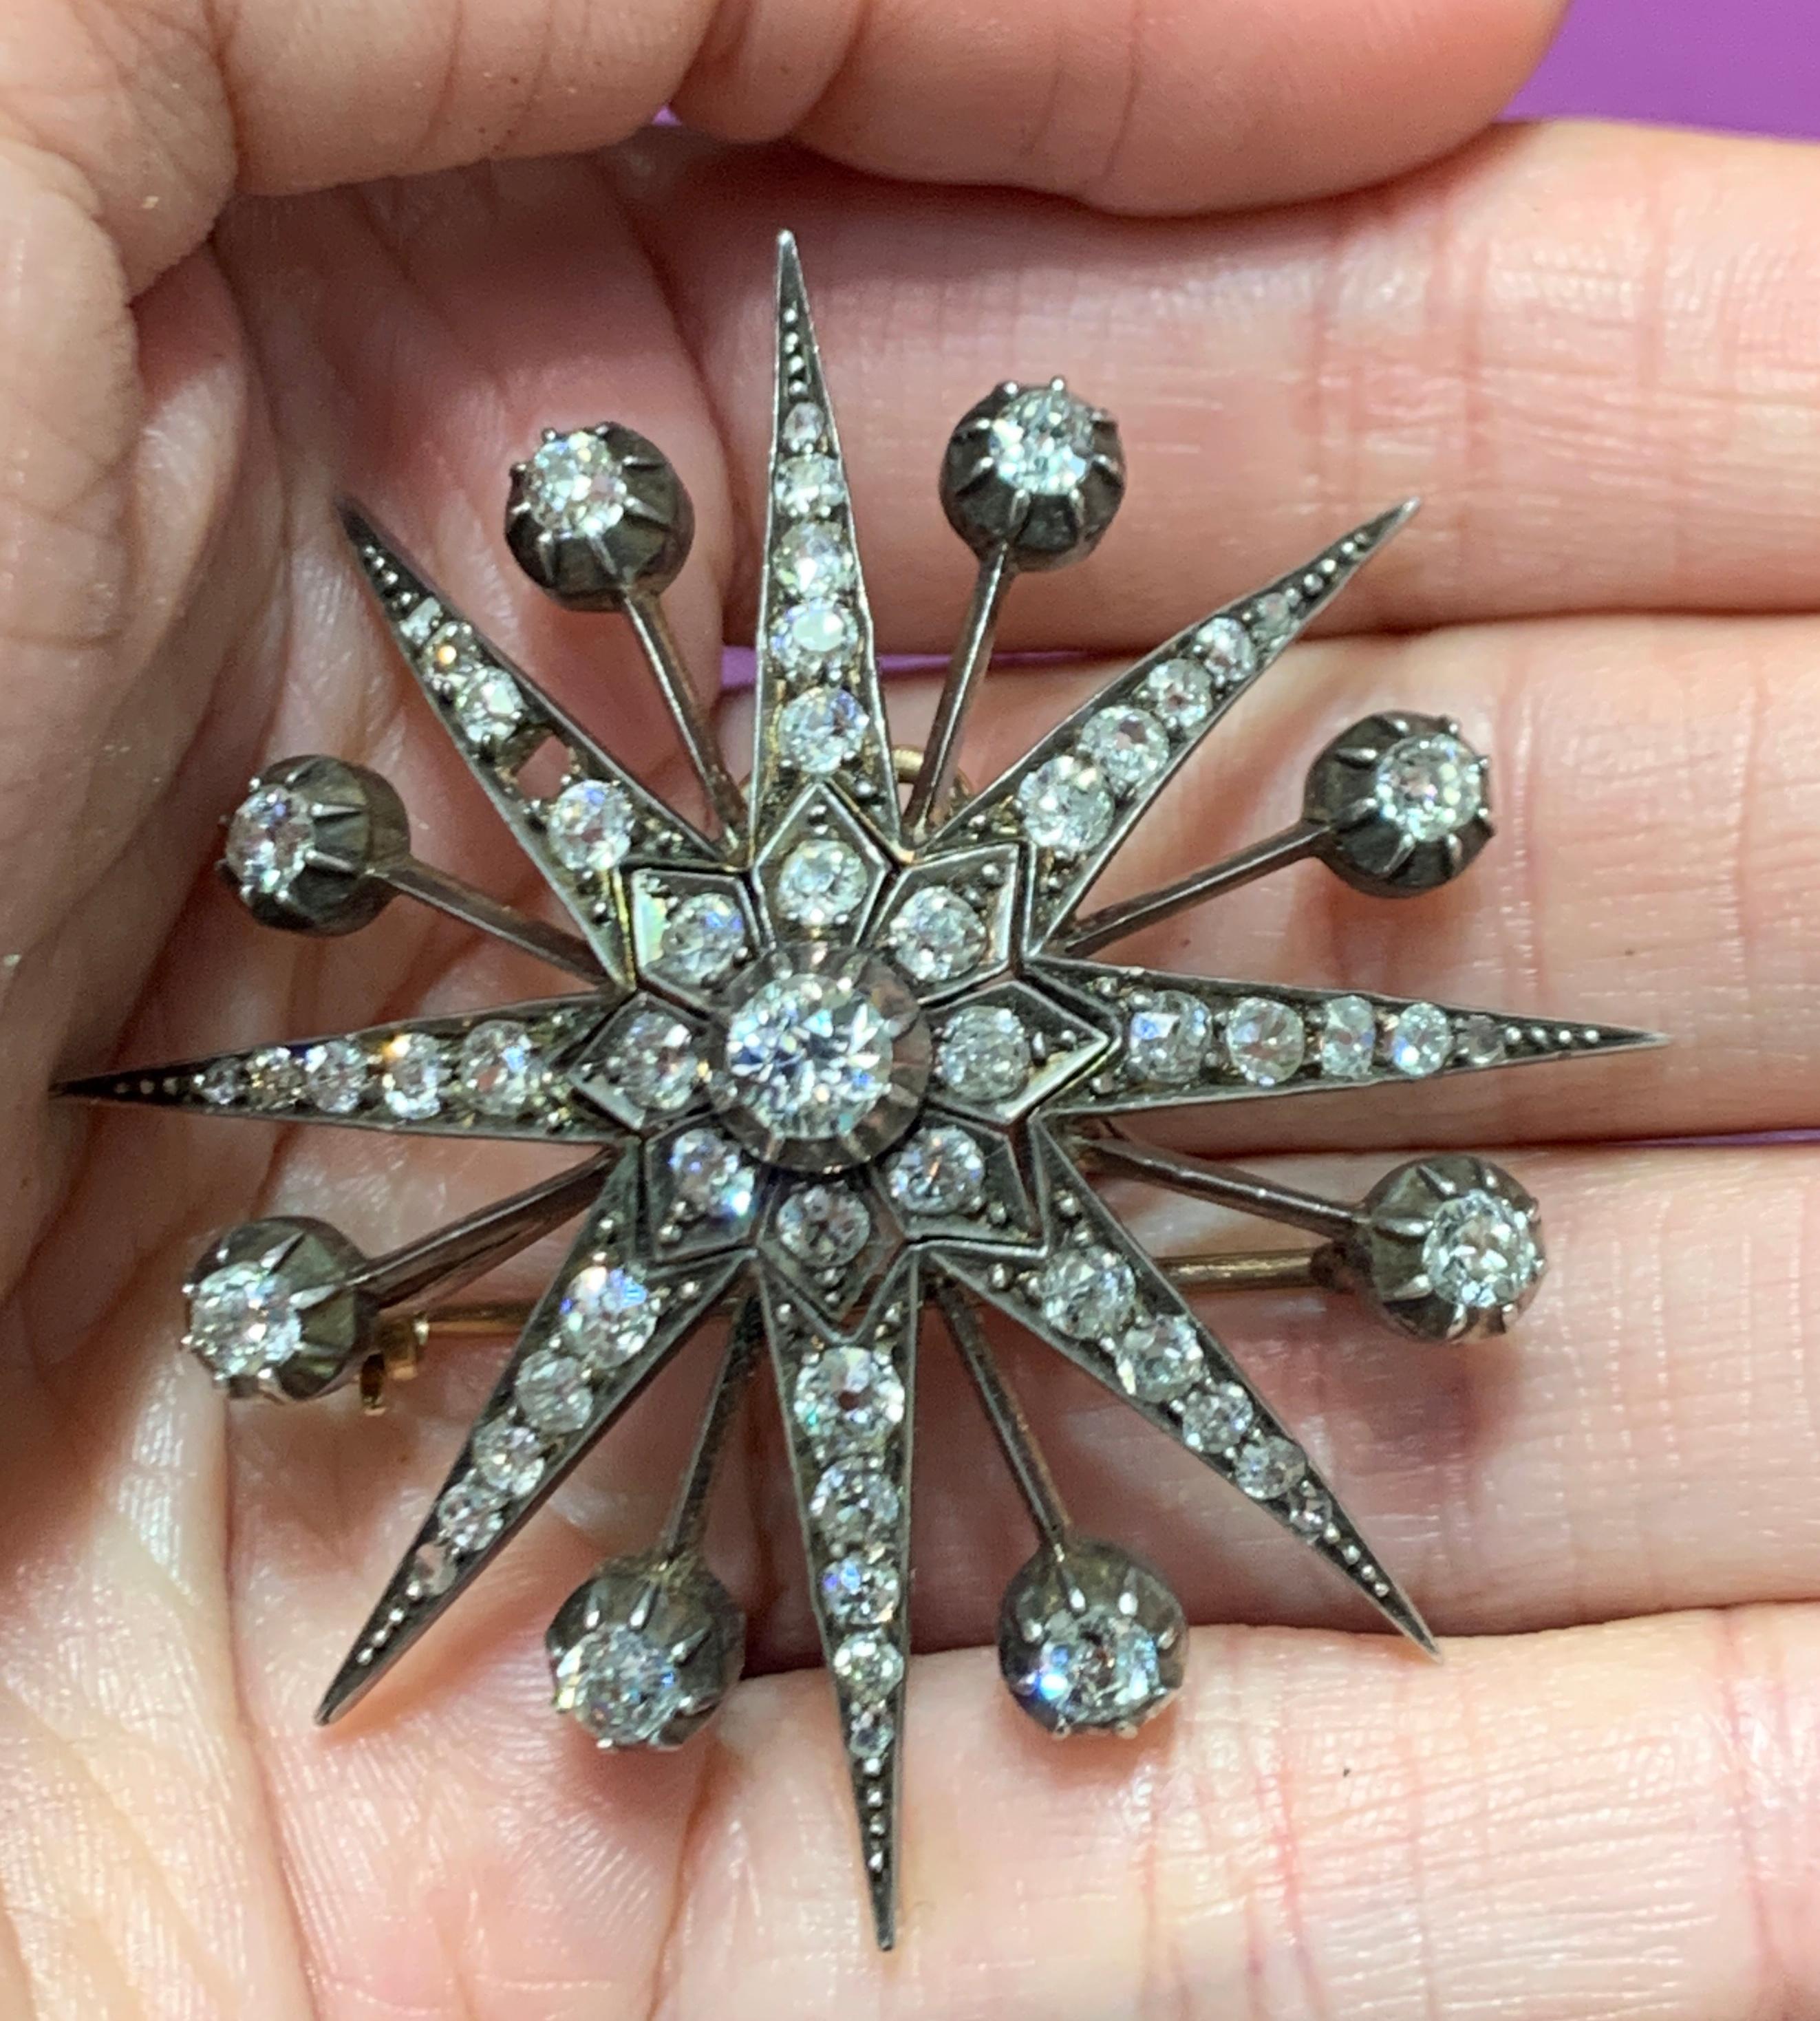 Victorian Diamond Star Brooch 
Mounted on Silver and Gold
Measurements: 1.75 inches long
Total approximate diamond weight: 5.6ct